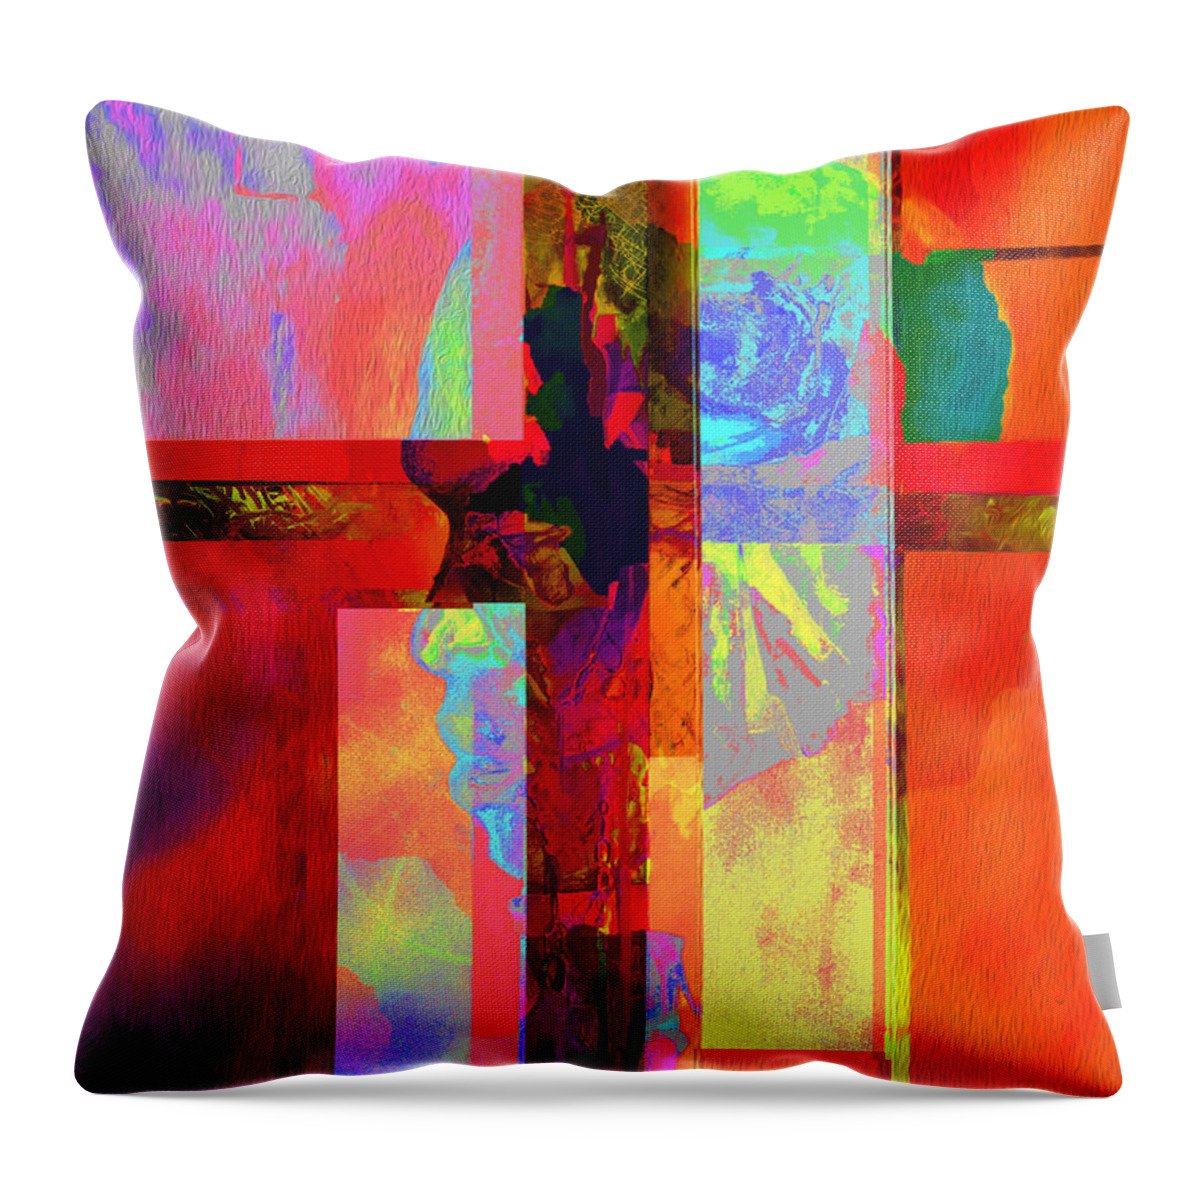 Portraits Of The Cross Throw Pillow featuring the digital art Portraits of the Cross 9 by Aldane Wynter